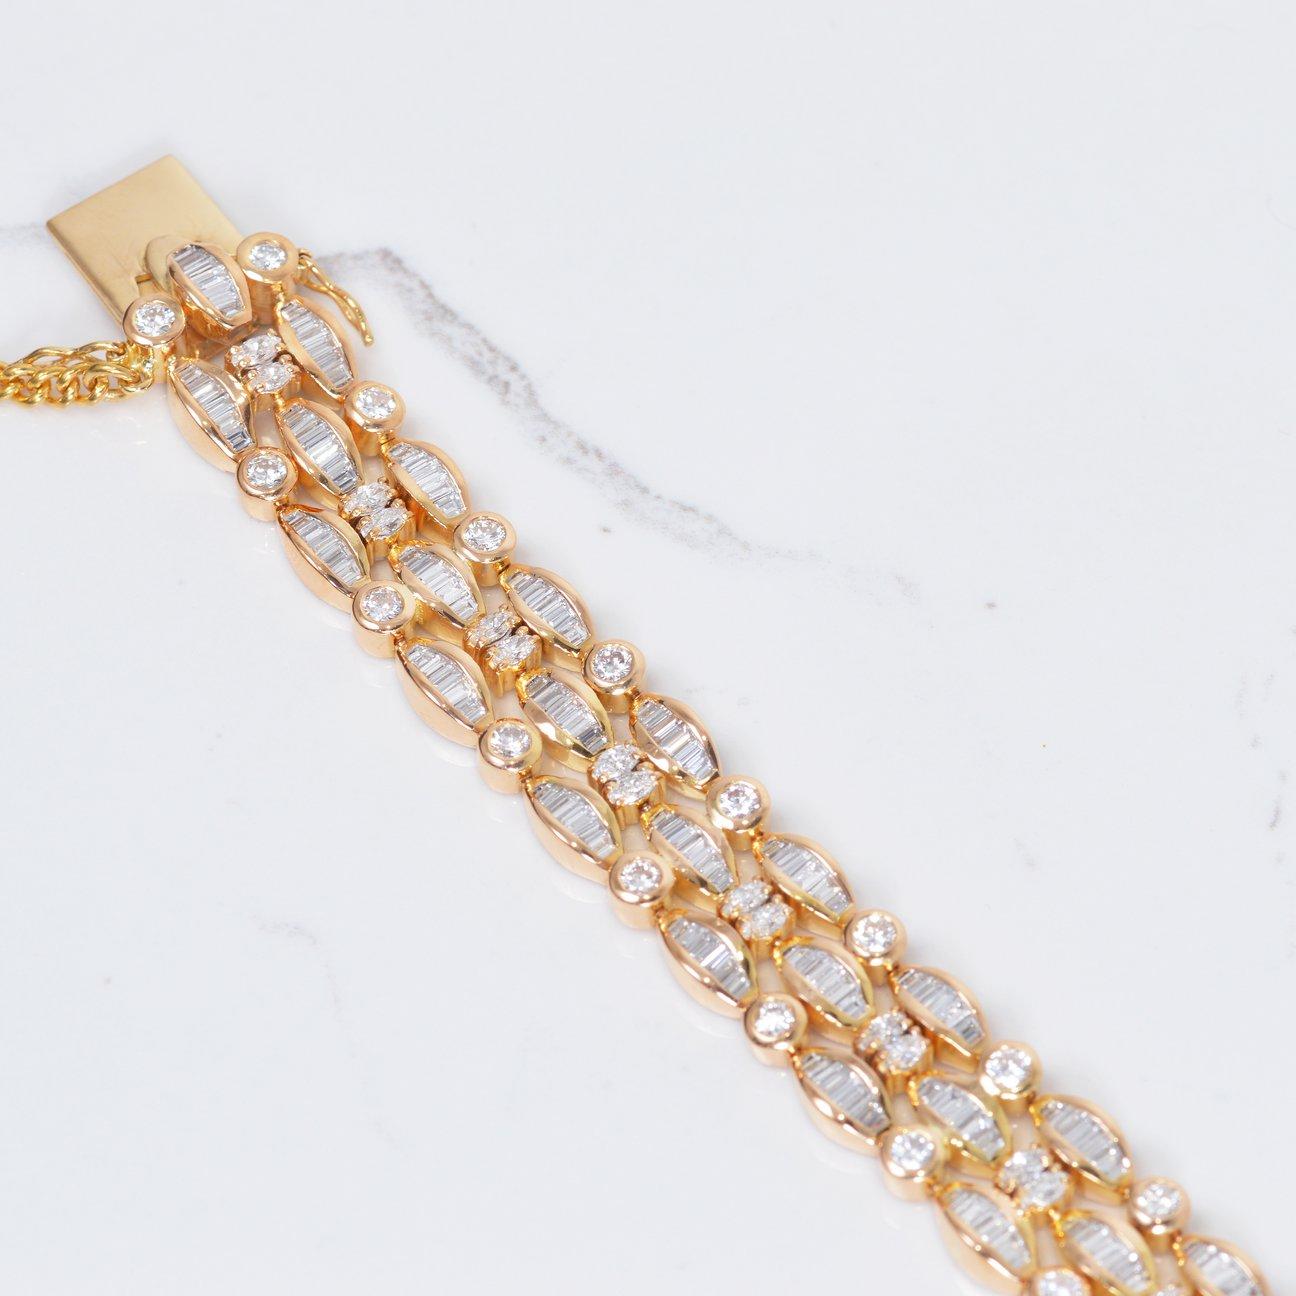 This magnificent diamond bracelet is a reclaimed vintage piece, and we can't get enough of it! This gorgeous bracelet is filled with 11.25 carats of diamonds that are all set in 22k yellow gold. The measurement of this is 7 inches length.